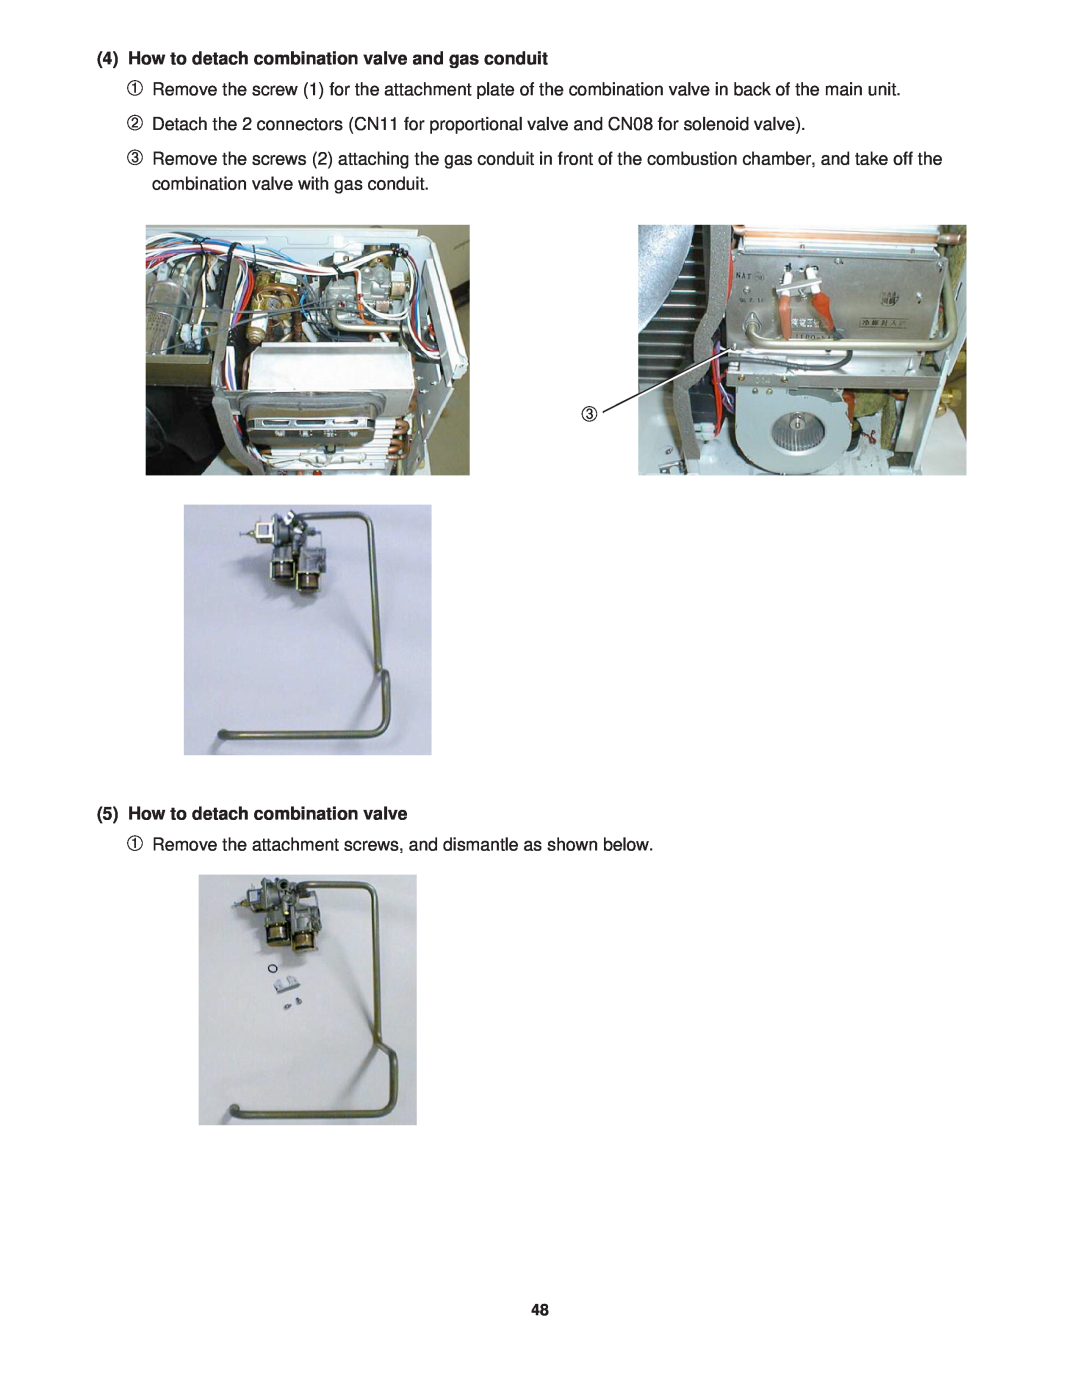 Sanyo CG1411, KGS1411 service manual 4How to detach combination valve and gas conduit, 5How to detach combination valve 